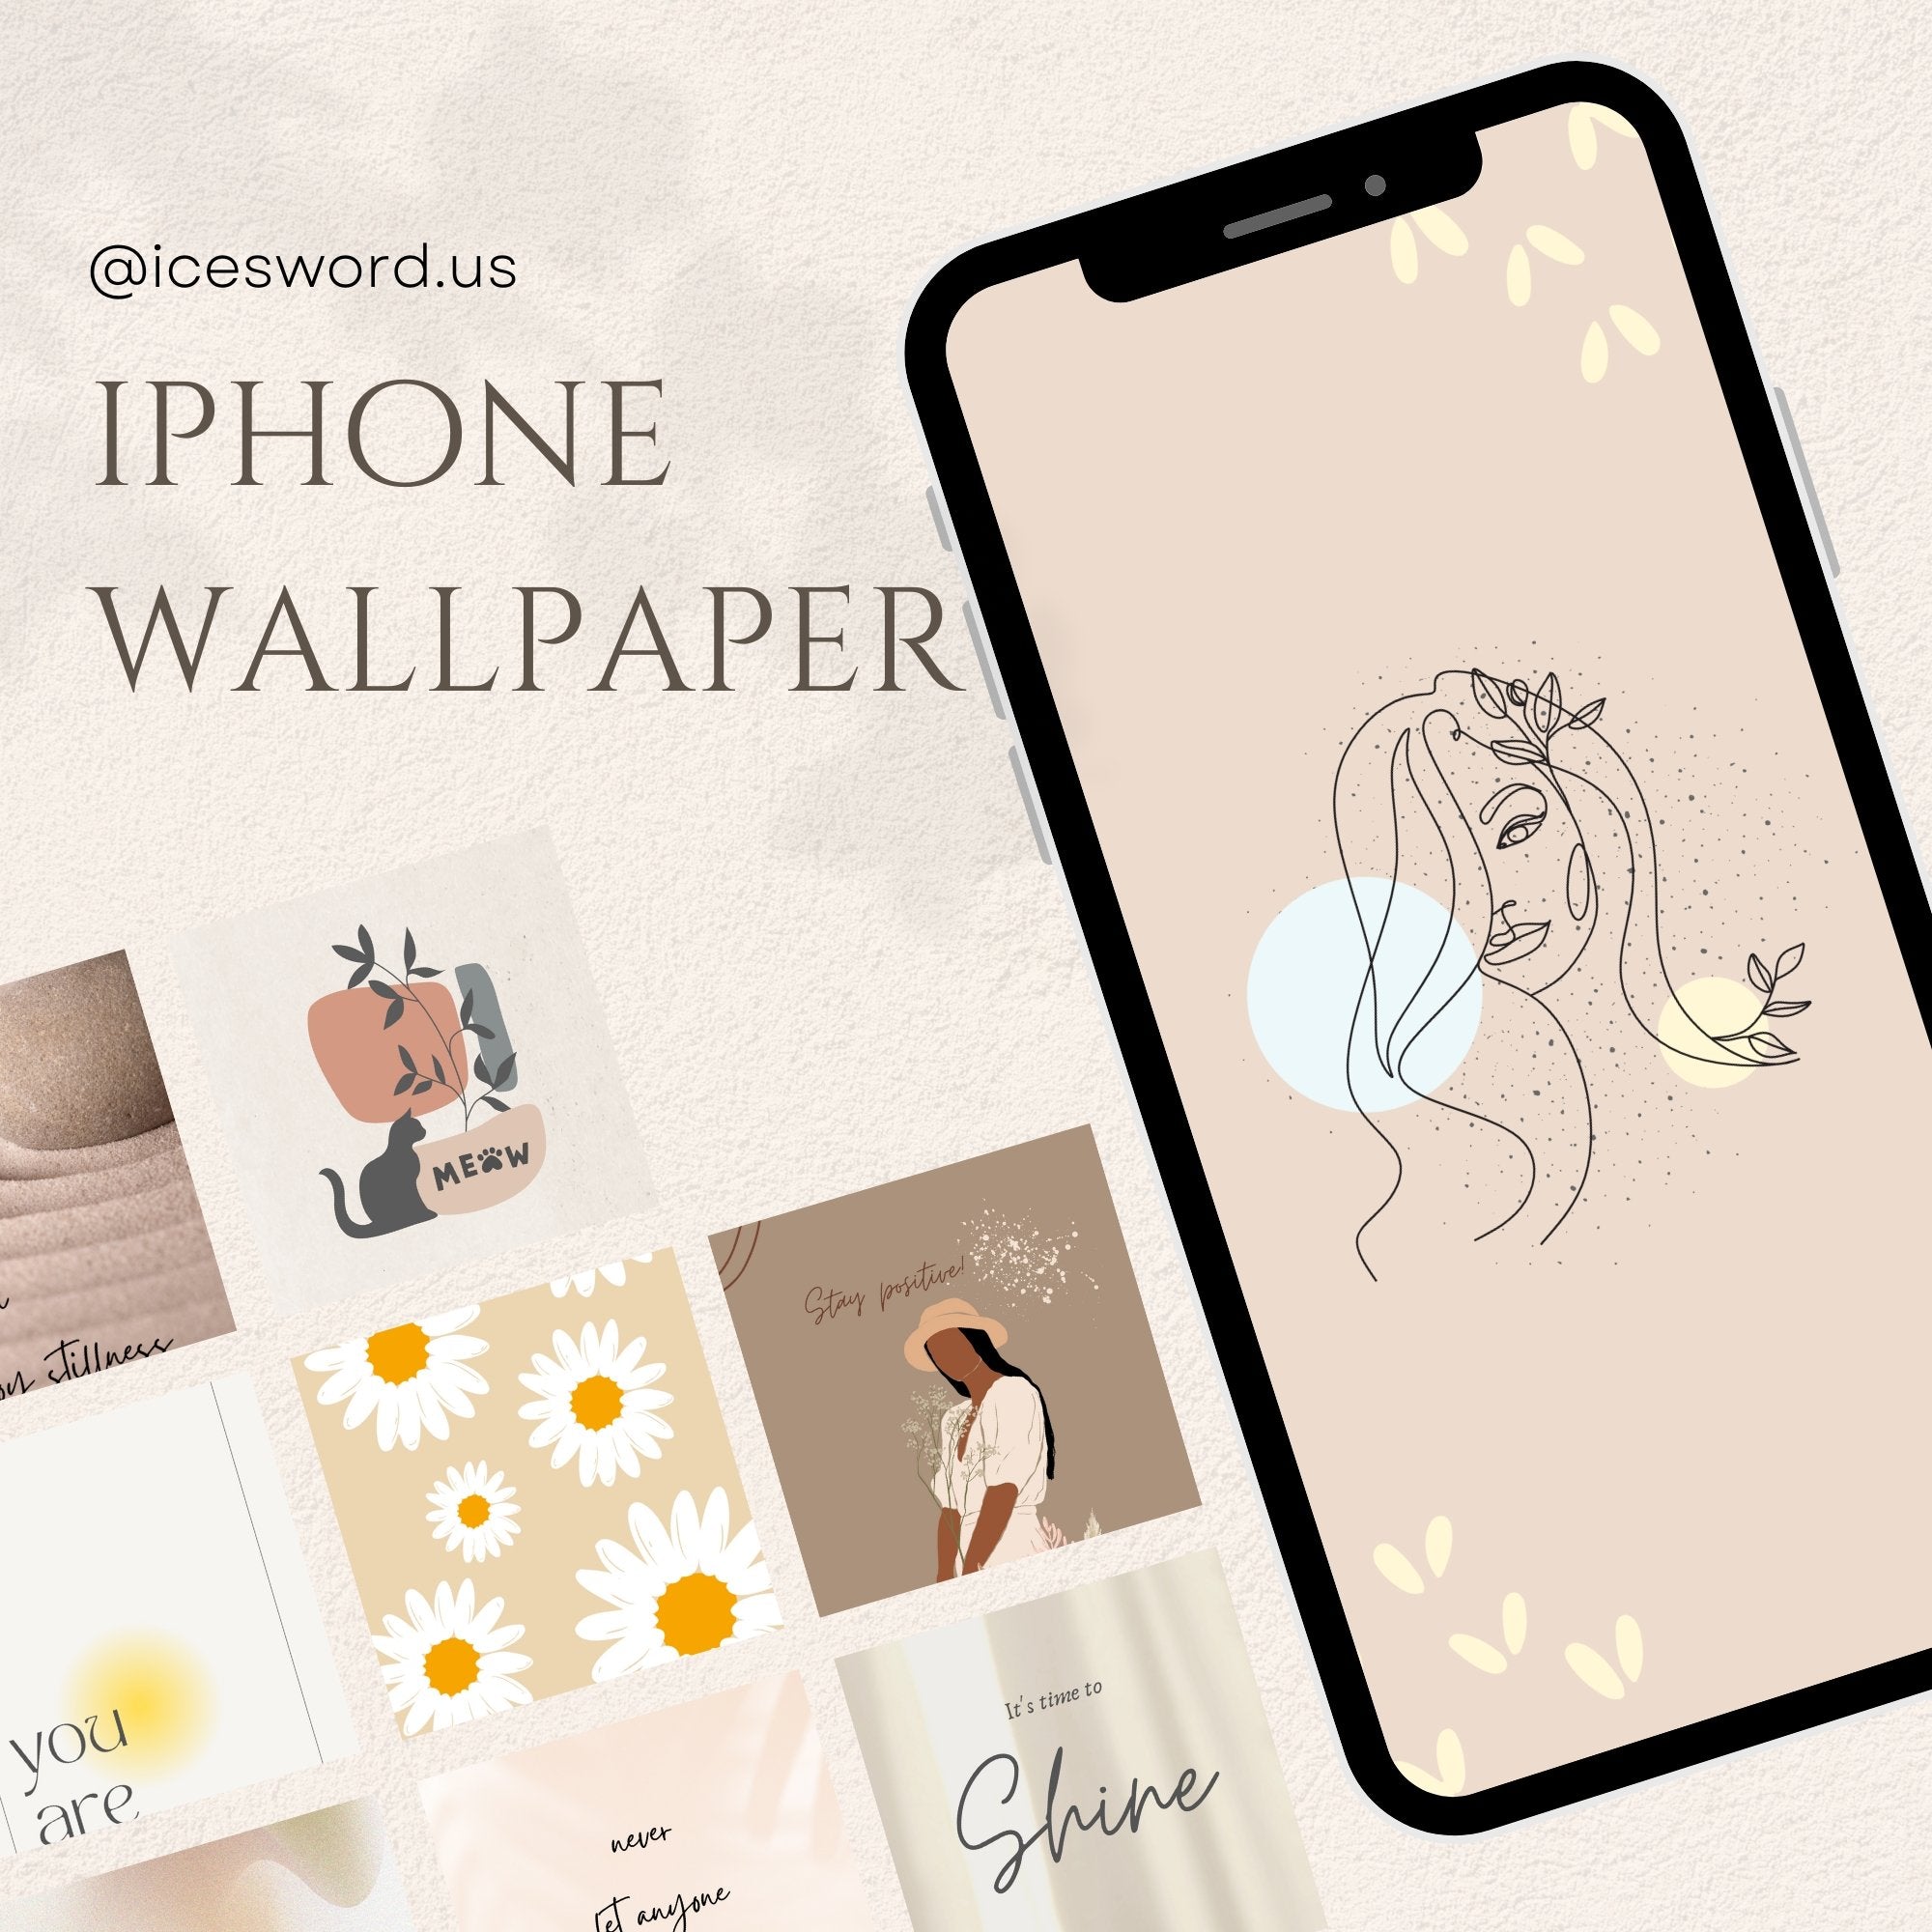 900+ Phone Wallpapers ideas in 2023